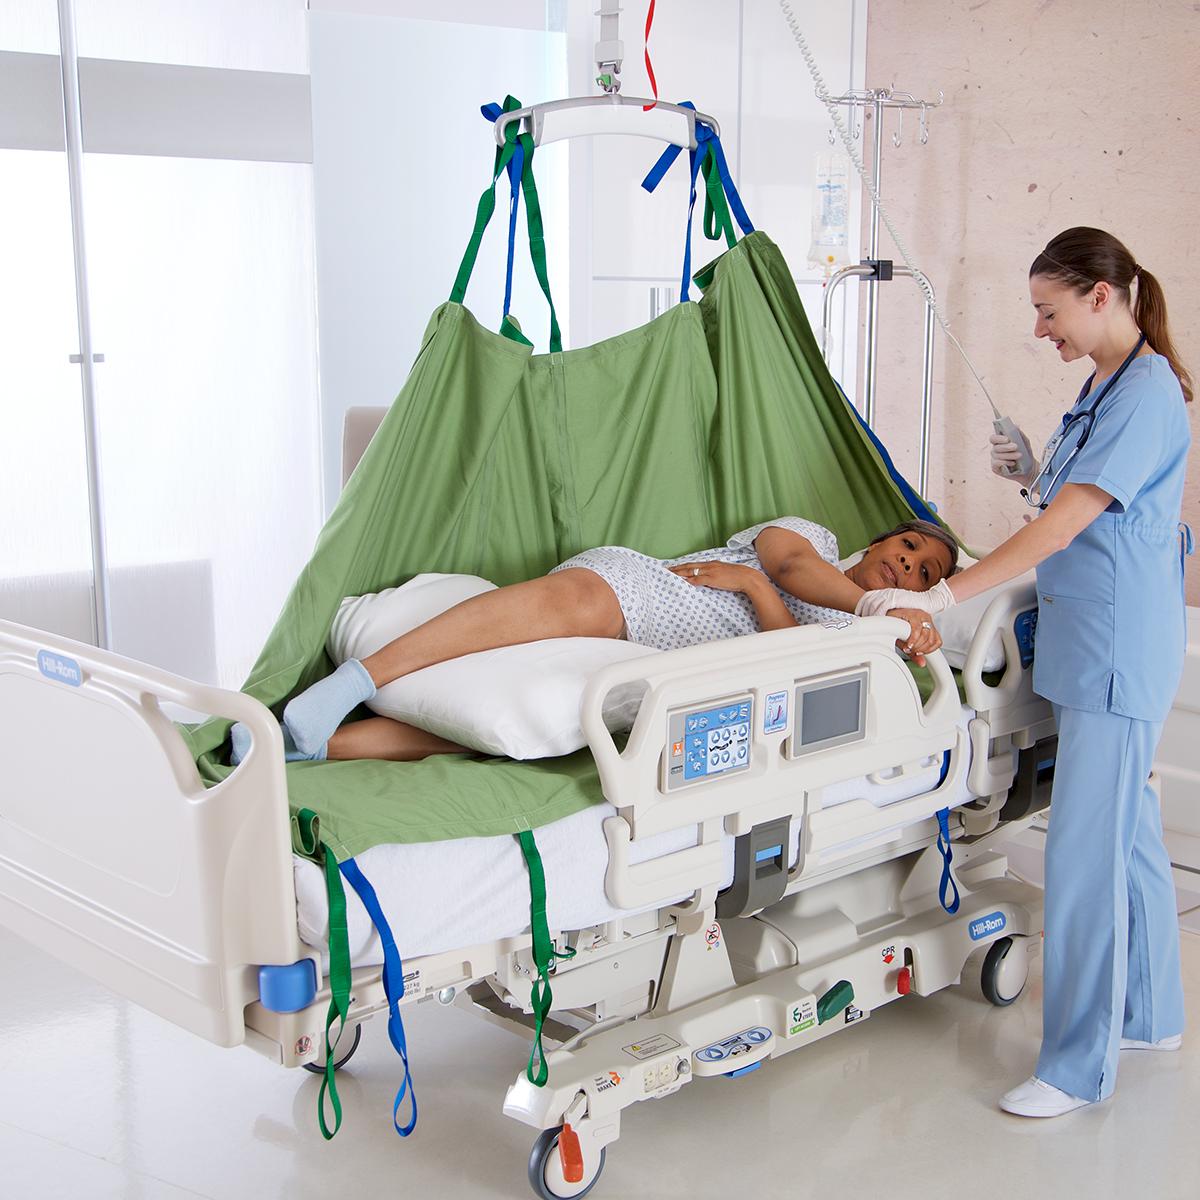 A clinician uses a Hillrom overhead lift and Repo Sheet to reposition a patient in a hospital bed